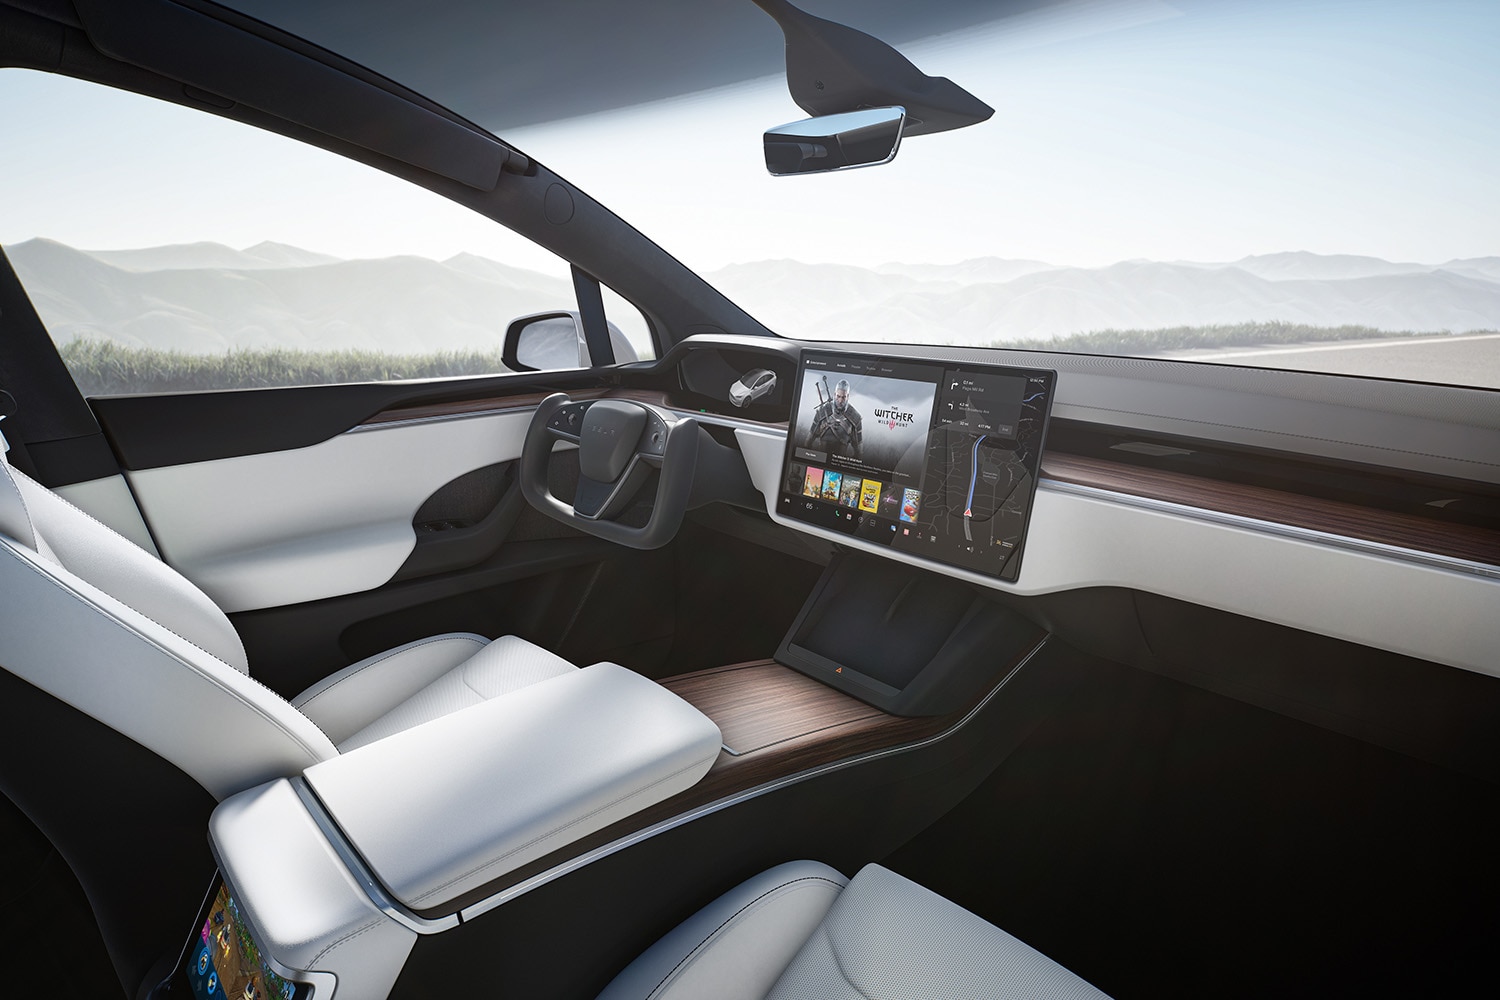 Interior of Tesla with infotainment screen